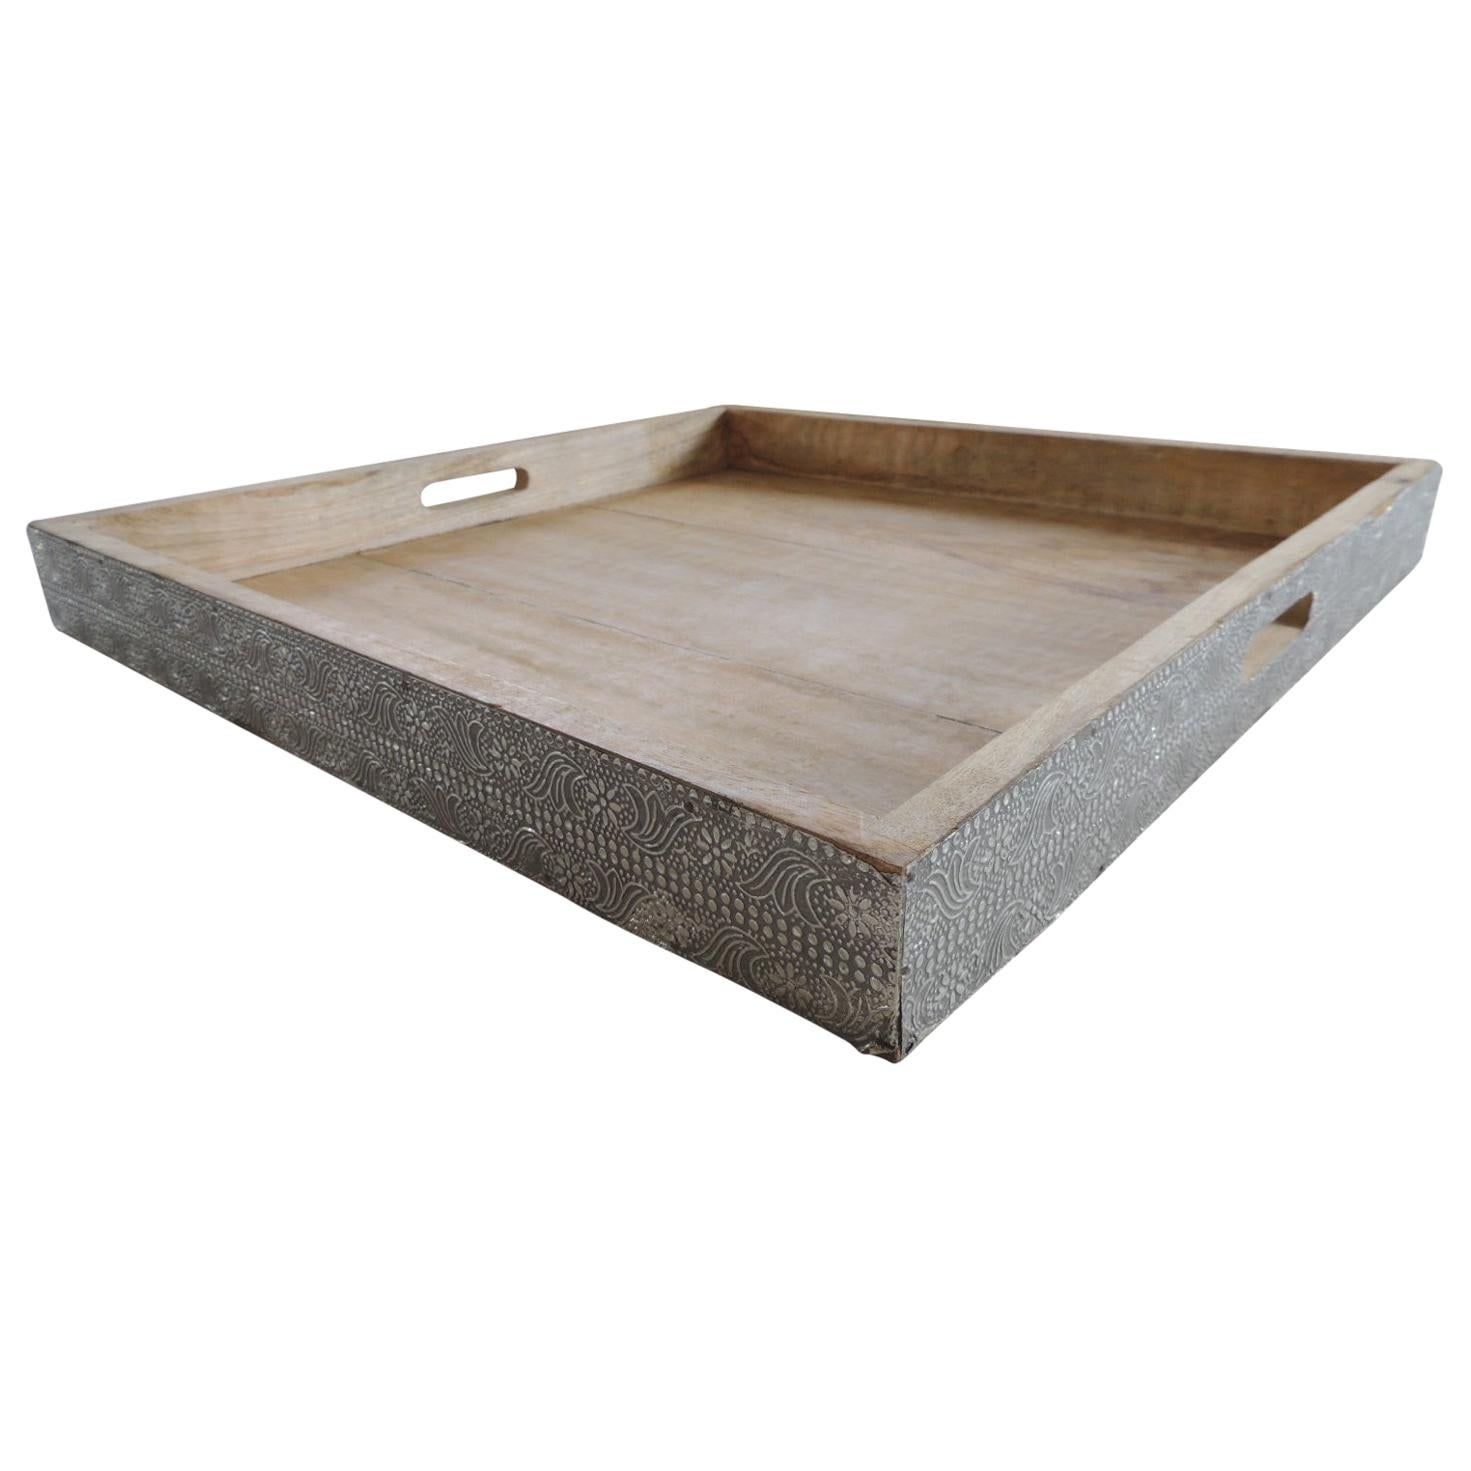 Large Indian Reclaimed Wood Square Tray with Silver Tin Trim